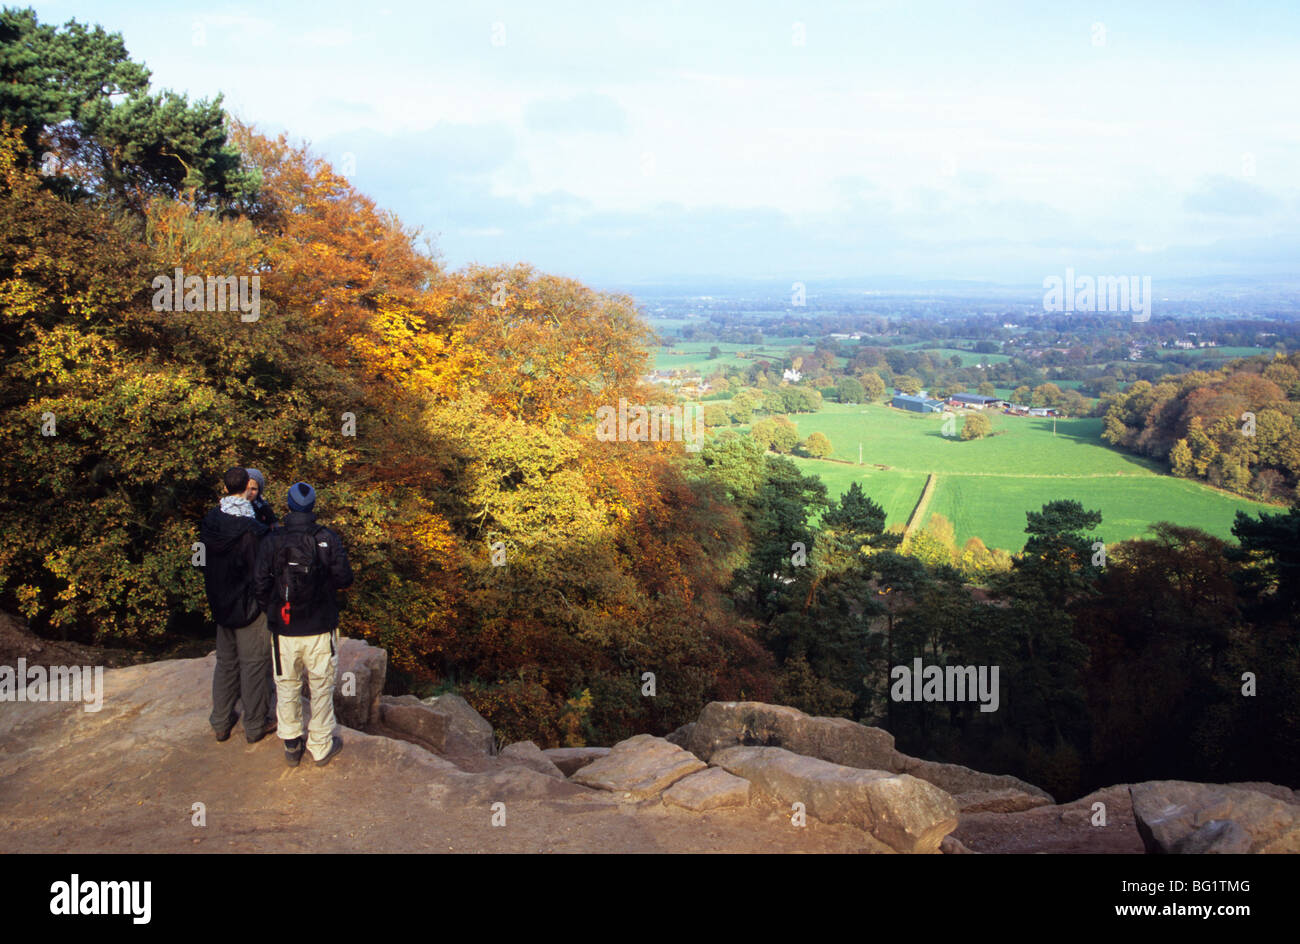 The View From The Sandstone Ridge at Alderley Edge Overlooking Cheshire Stock Photo